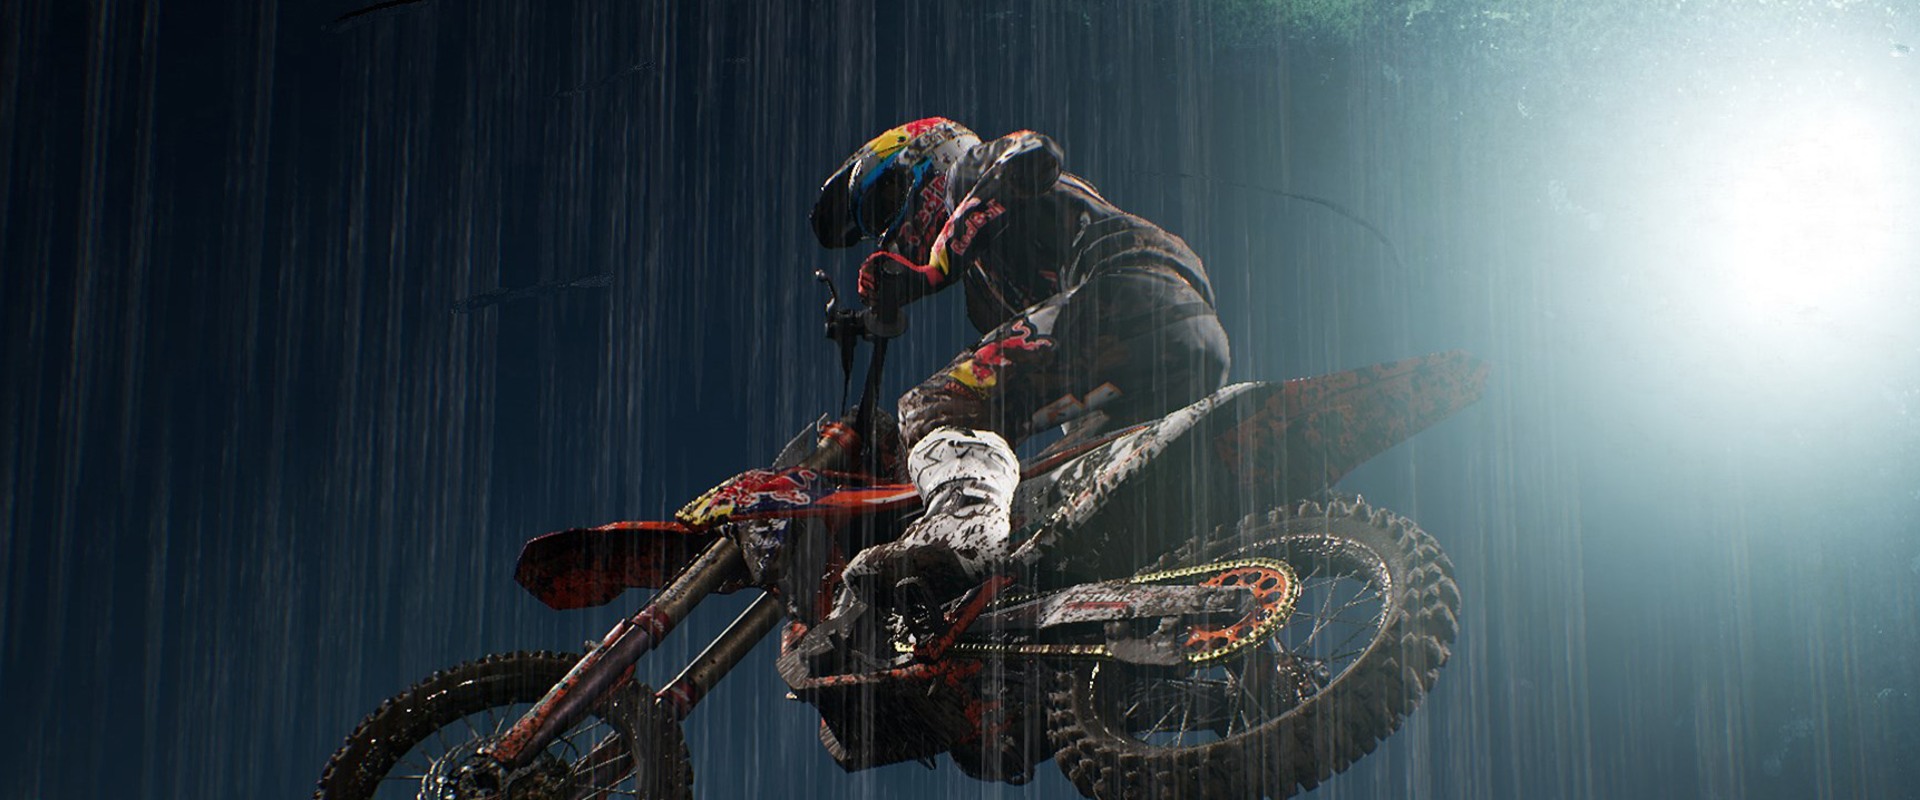 The Best Motocross PS4 Games - A Review